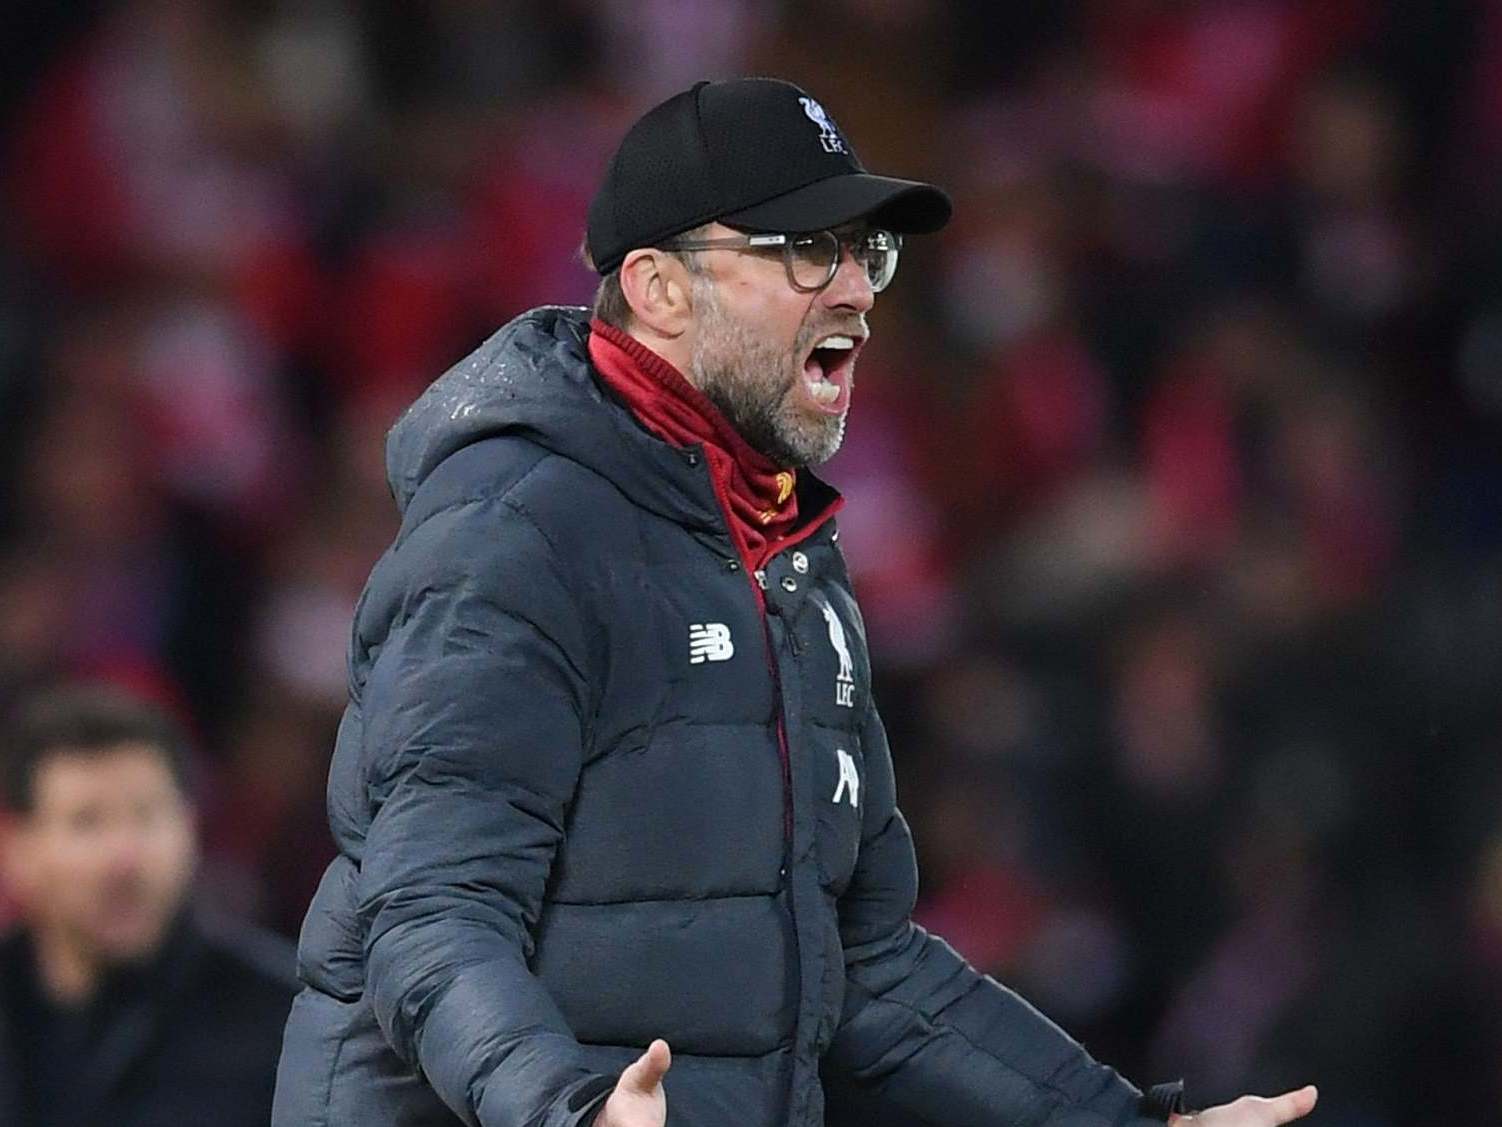 Jurgen Klopp's Liverpool were later knocked out of the FA Cup by Chelsea